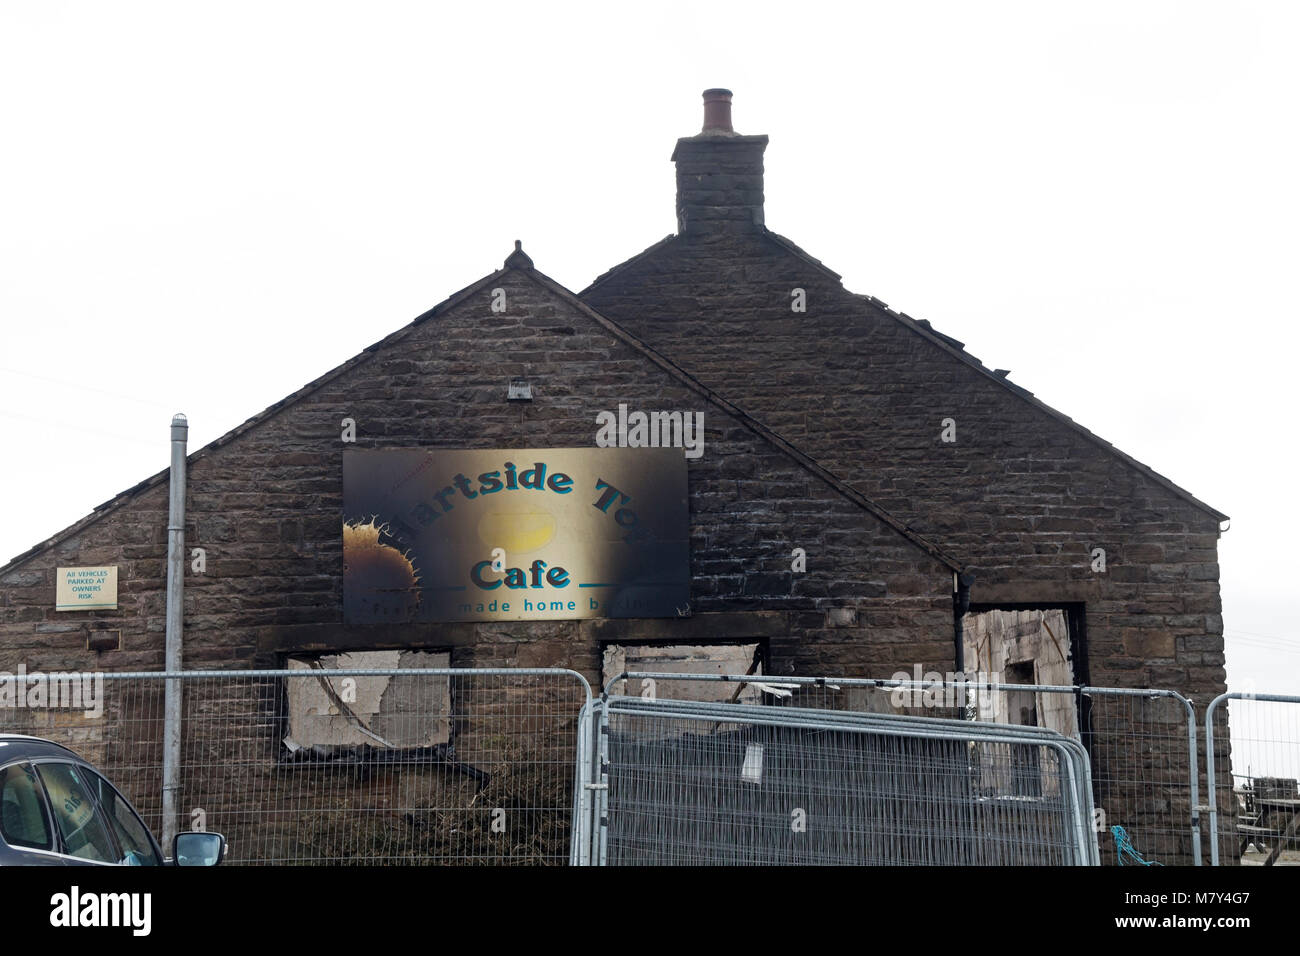 The Famous Hartside Cafe Near Alston After it was Destroyed by Fire in March 2018. Stock Photo